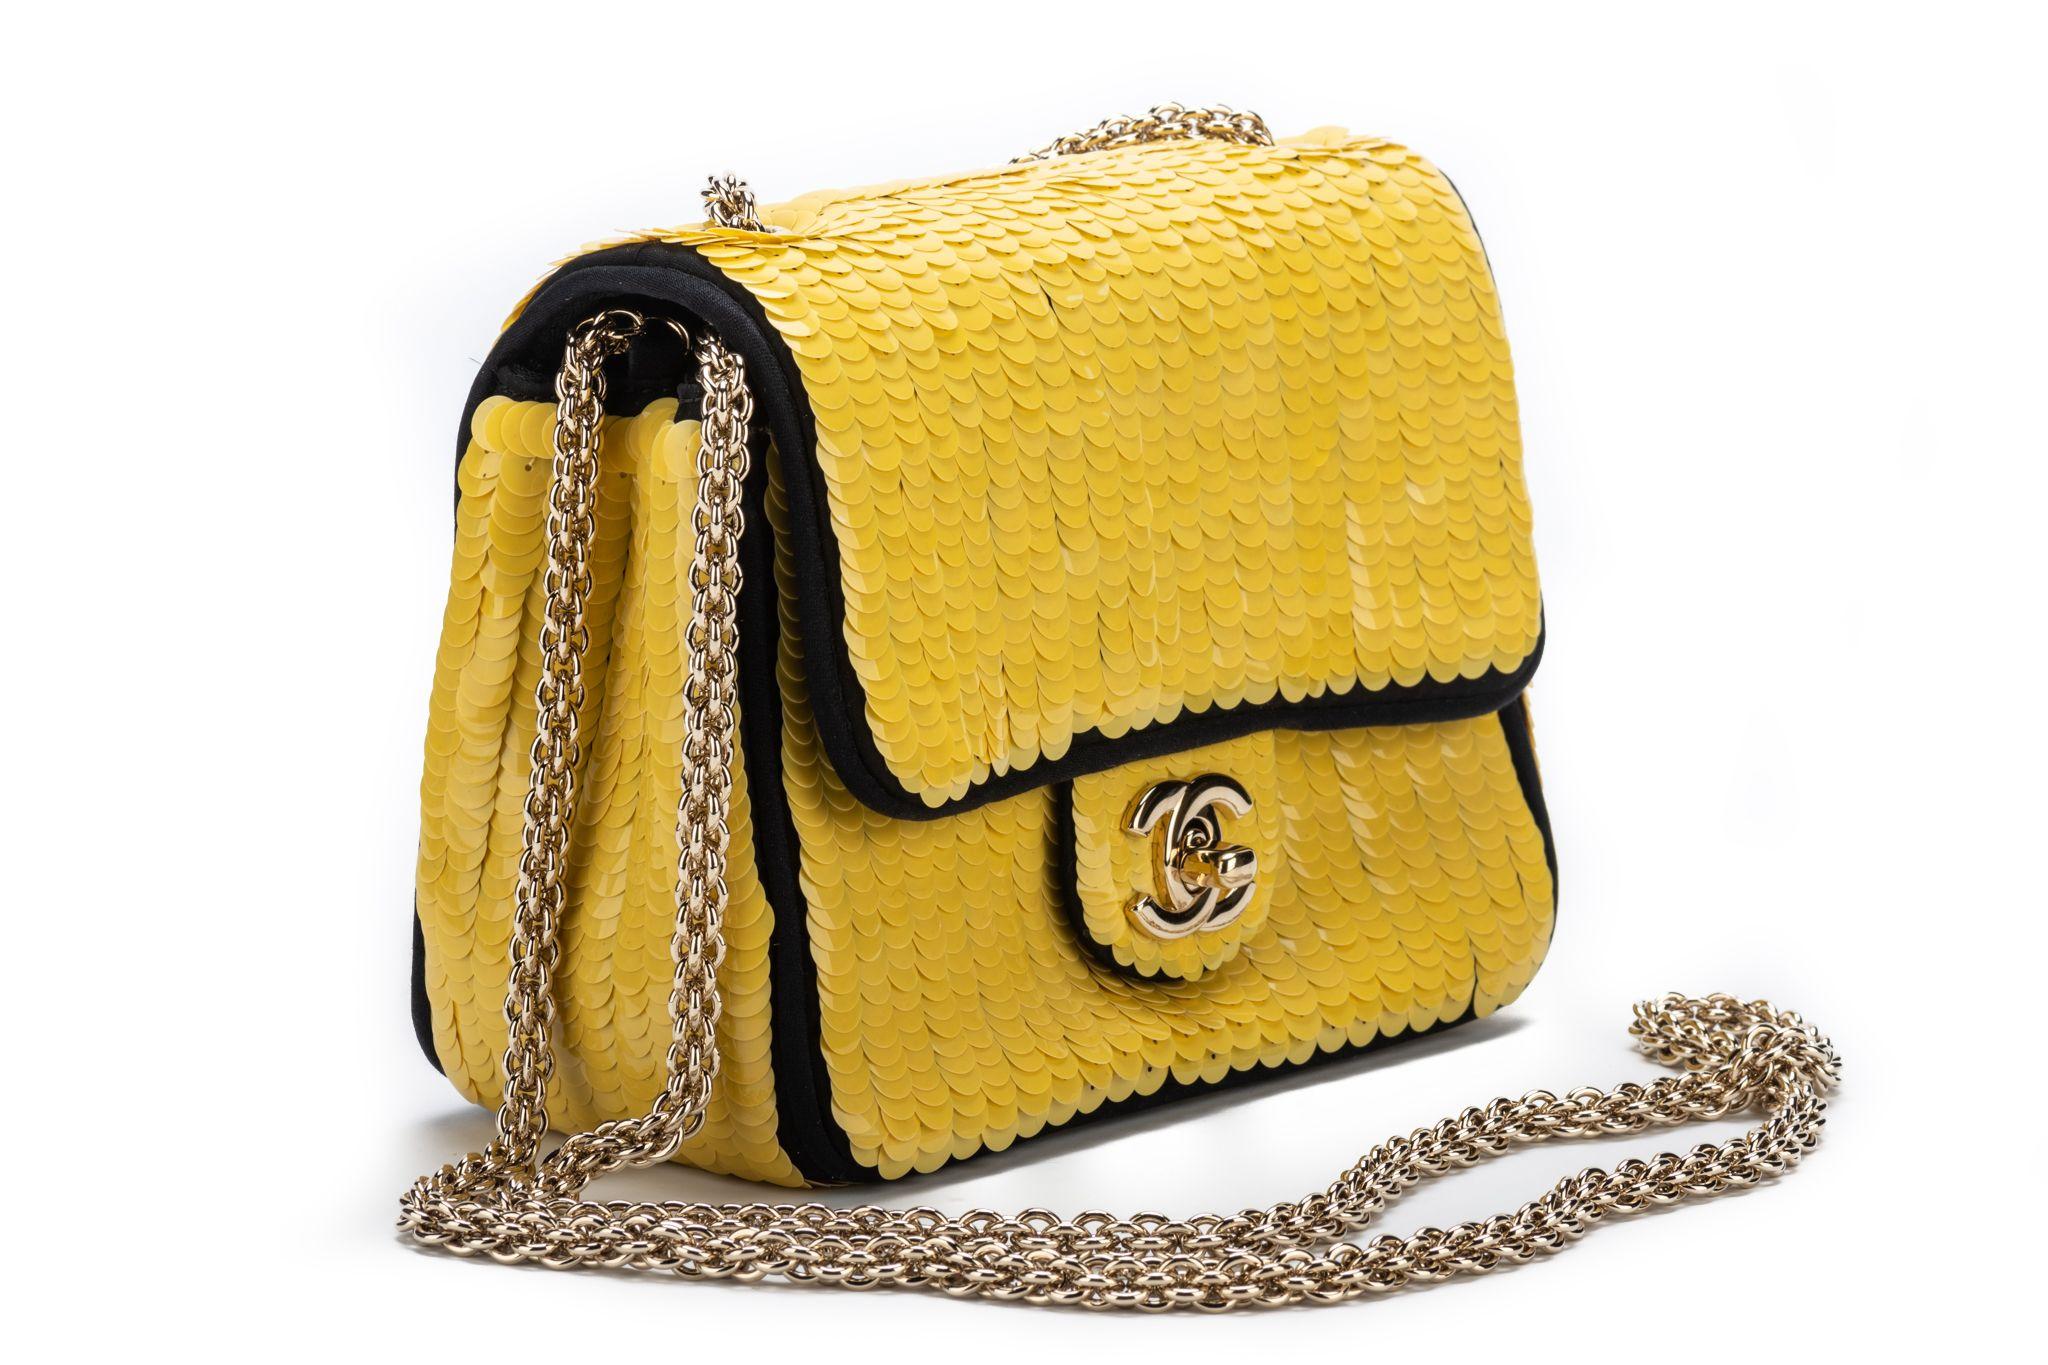 Chanel rare and collectible mint condition yellow sequins square classic flap with black silk interior and piping. Gold tone hardware. Comes with hologram, dust cover, box. Collection 13. Part of the Scuba collection look. Shoulder drop 20.5”.